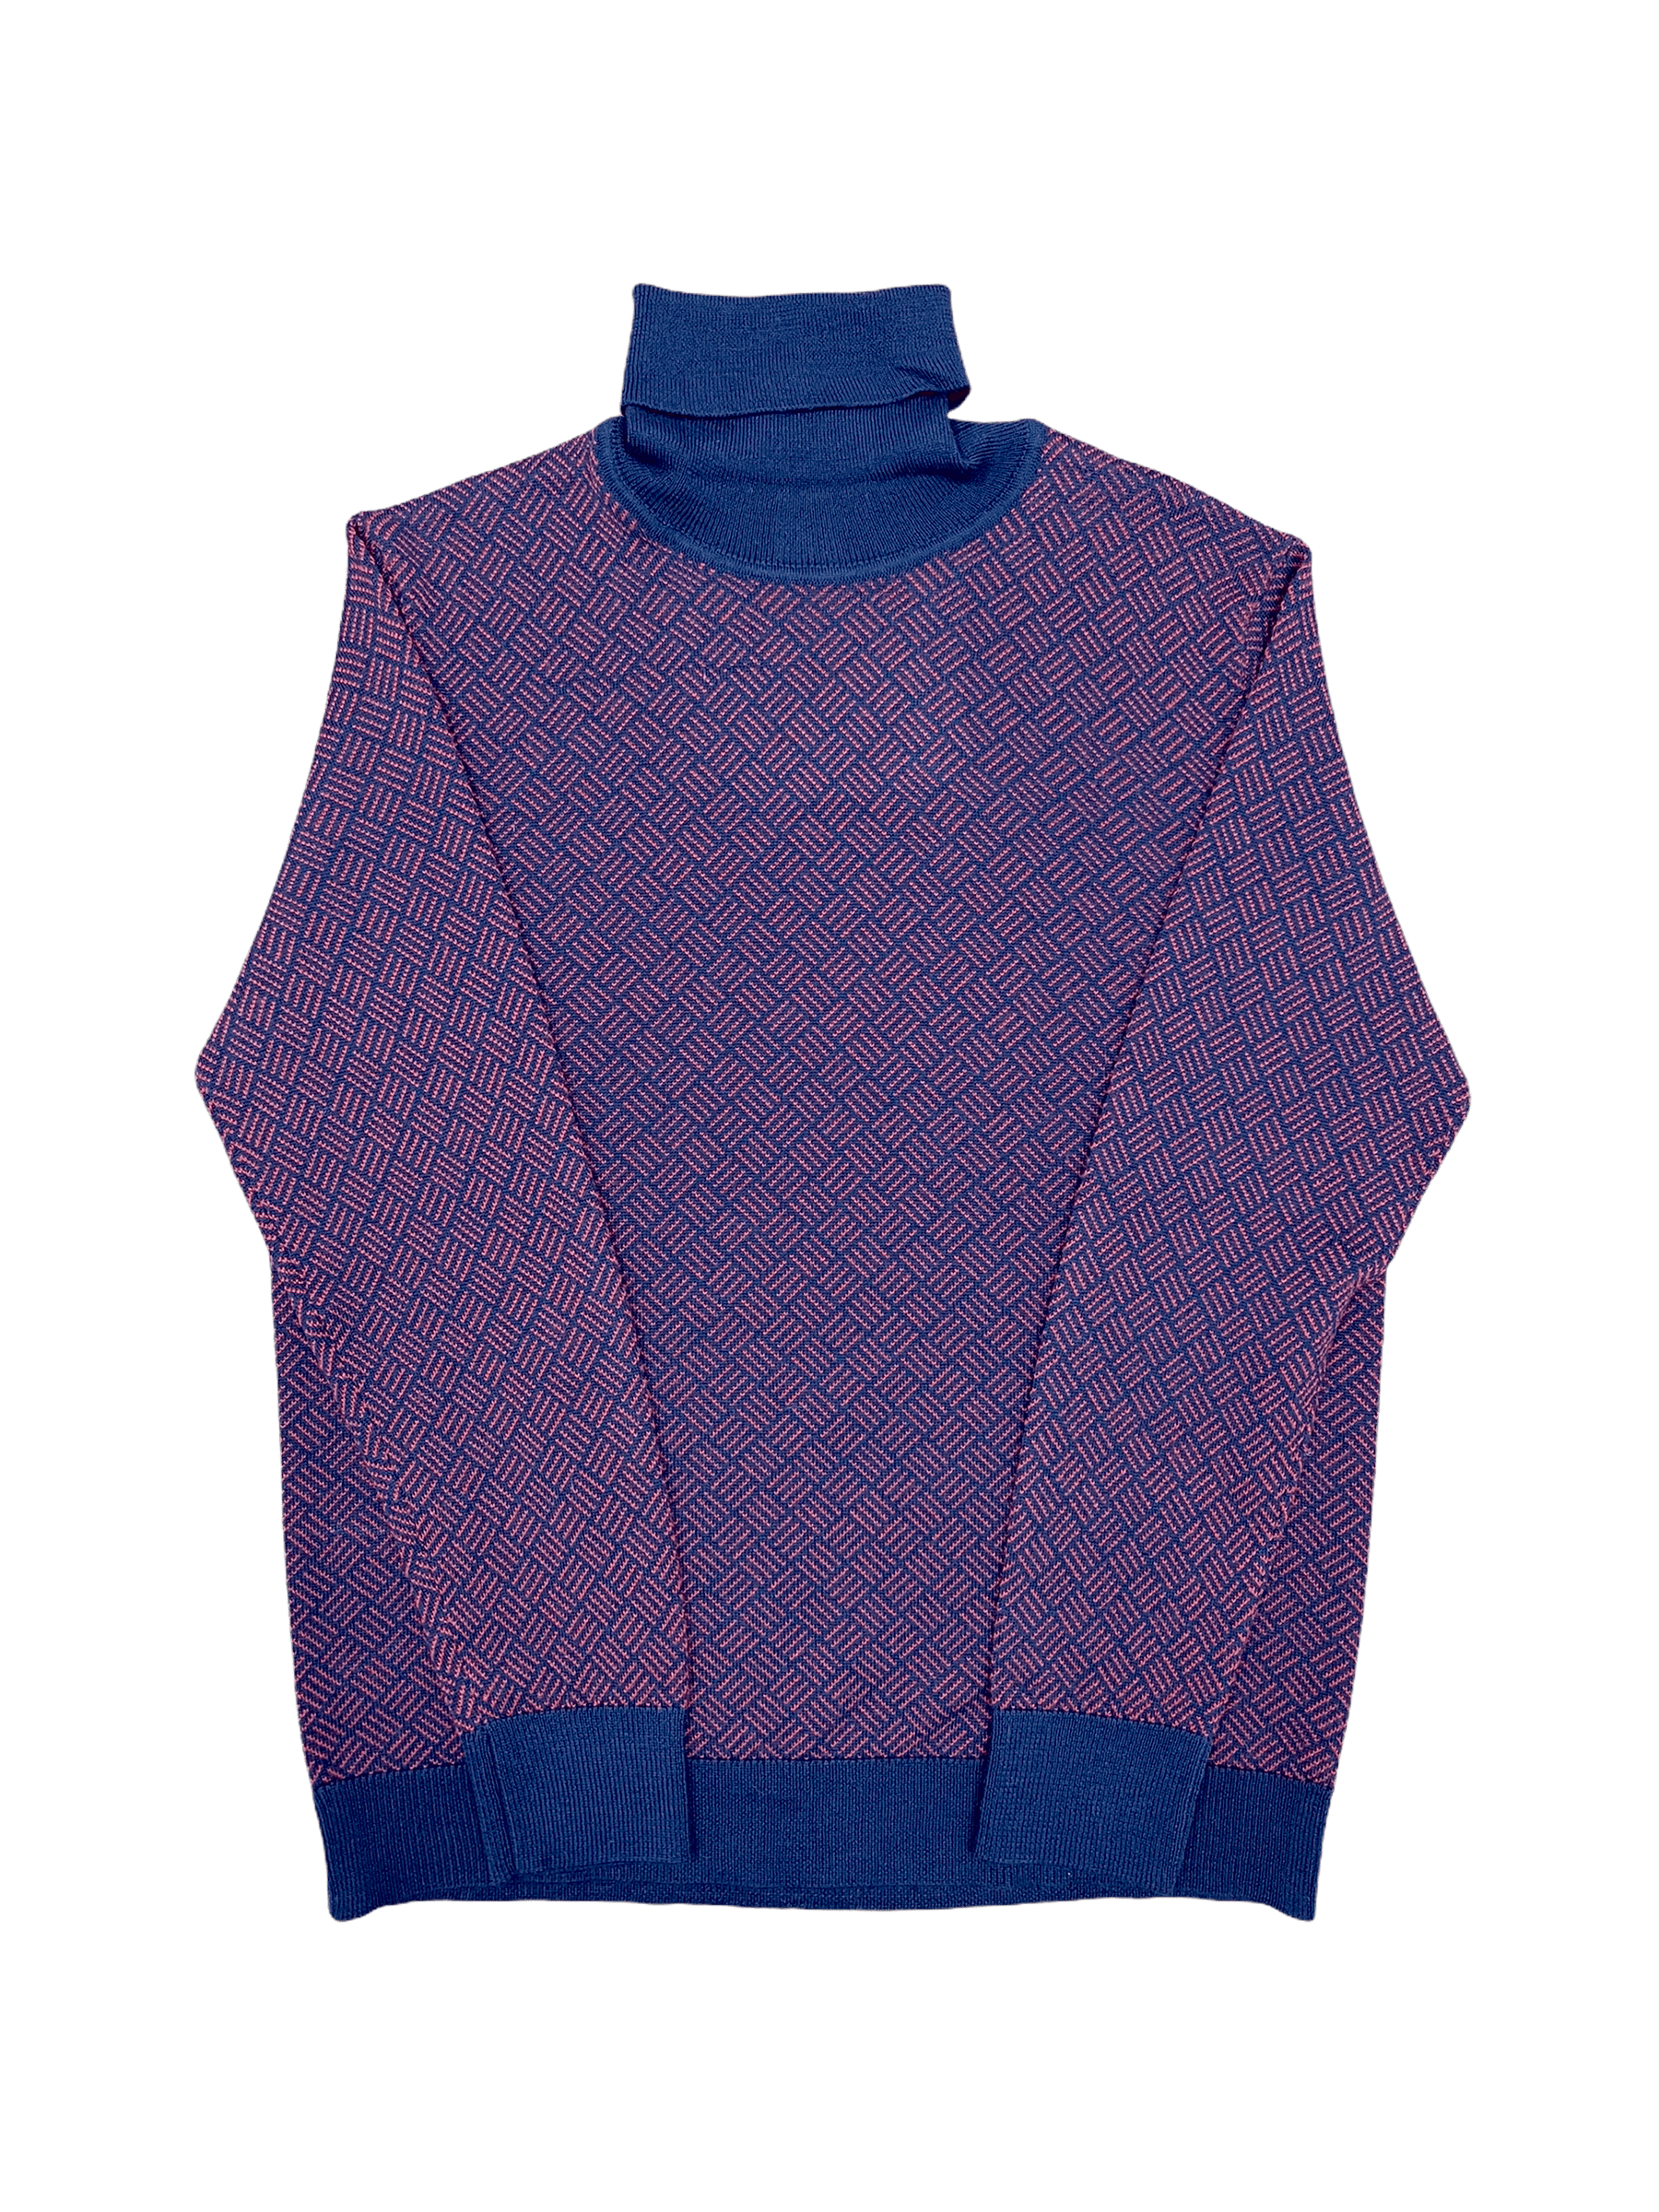 Progetto Uomo Red Blue Wool Turtleneck Large—Genuine Design luxury consignment